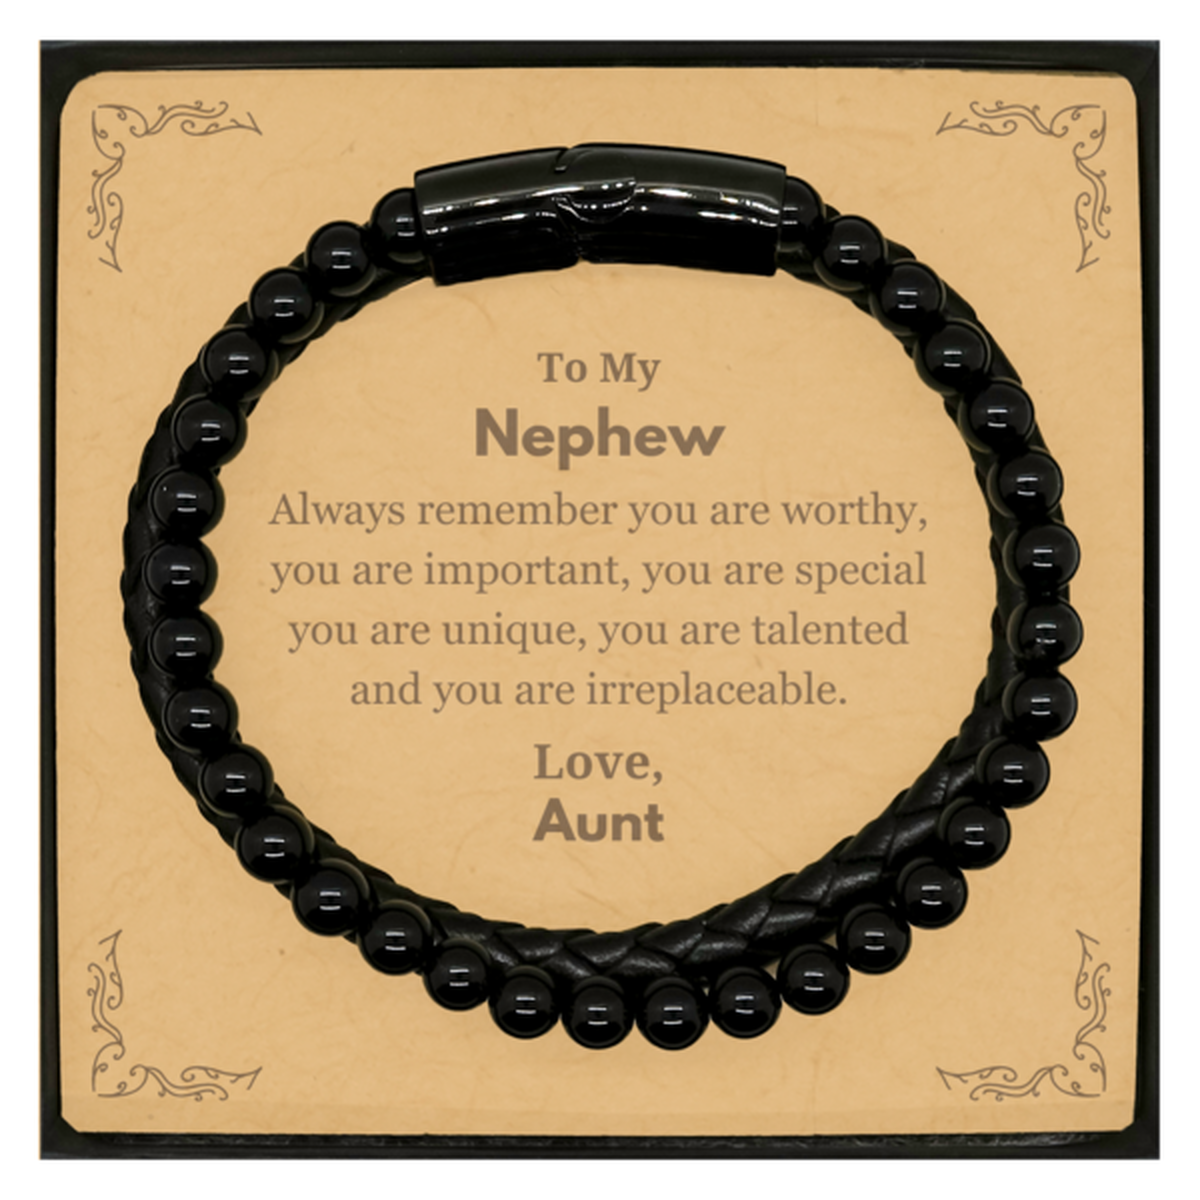 Nephew Birthday Gifts from Aunt, Inspirational Stone Leather Bracelets for Nephew Christmas Graduation Gifts for Nephew Always remember you are worthy, you are important. Love, Aunt